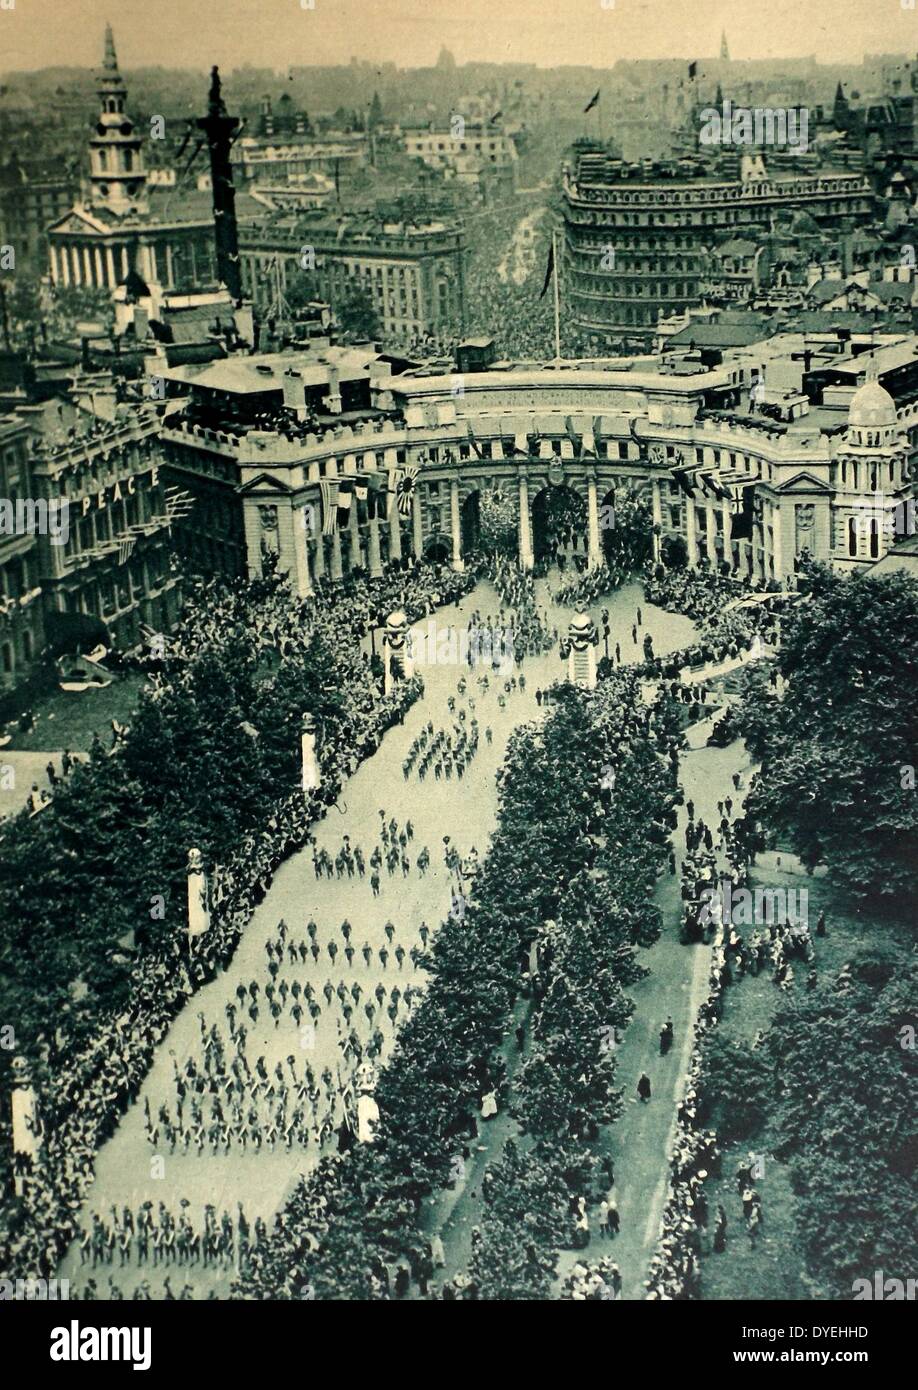 crowds gather at the Admiralty arch in London for a victory parade 19th June 1919 to mark the peace treaty signed at Versialles after World War I . Stock Photo